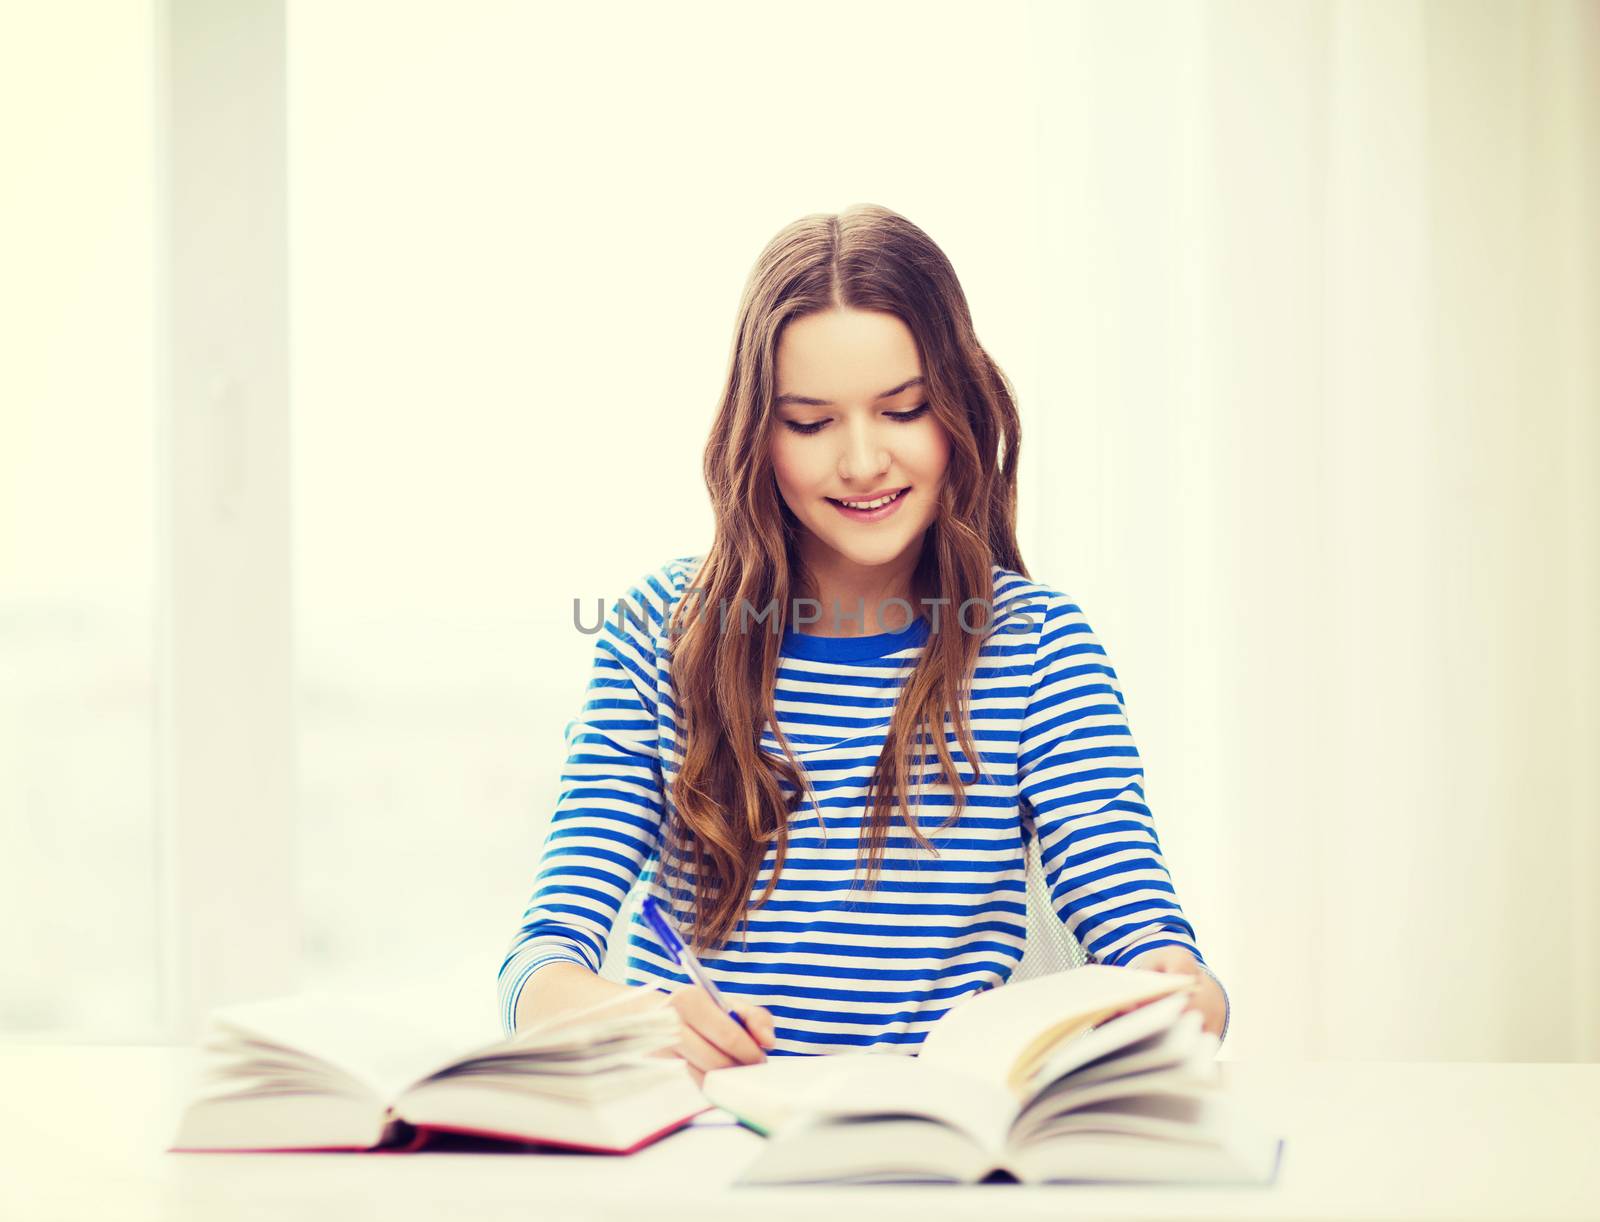 happy smiling student girl with books by dolgachov